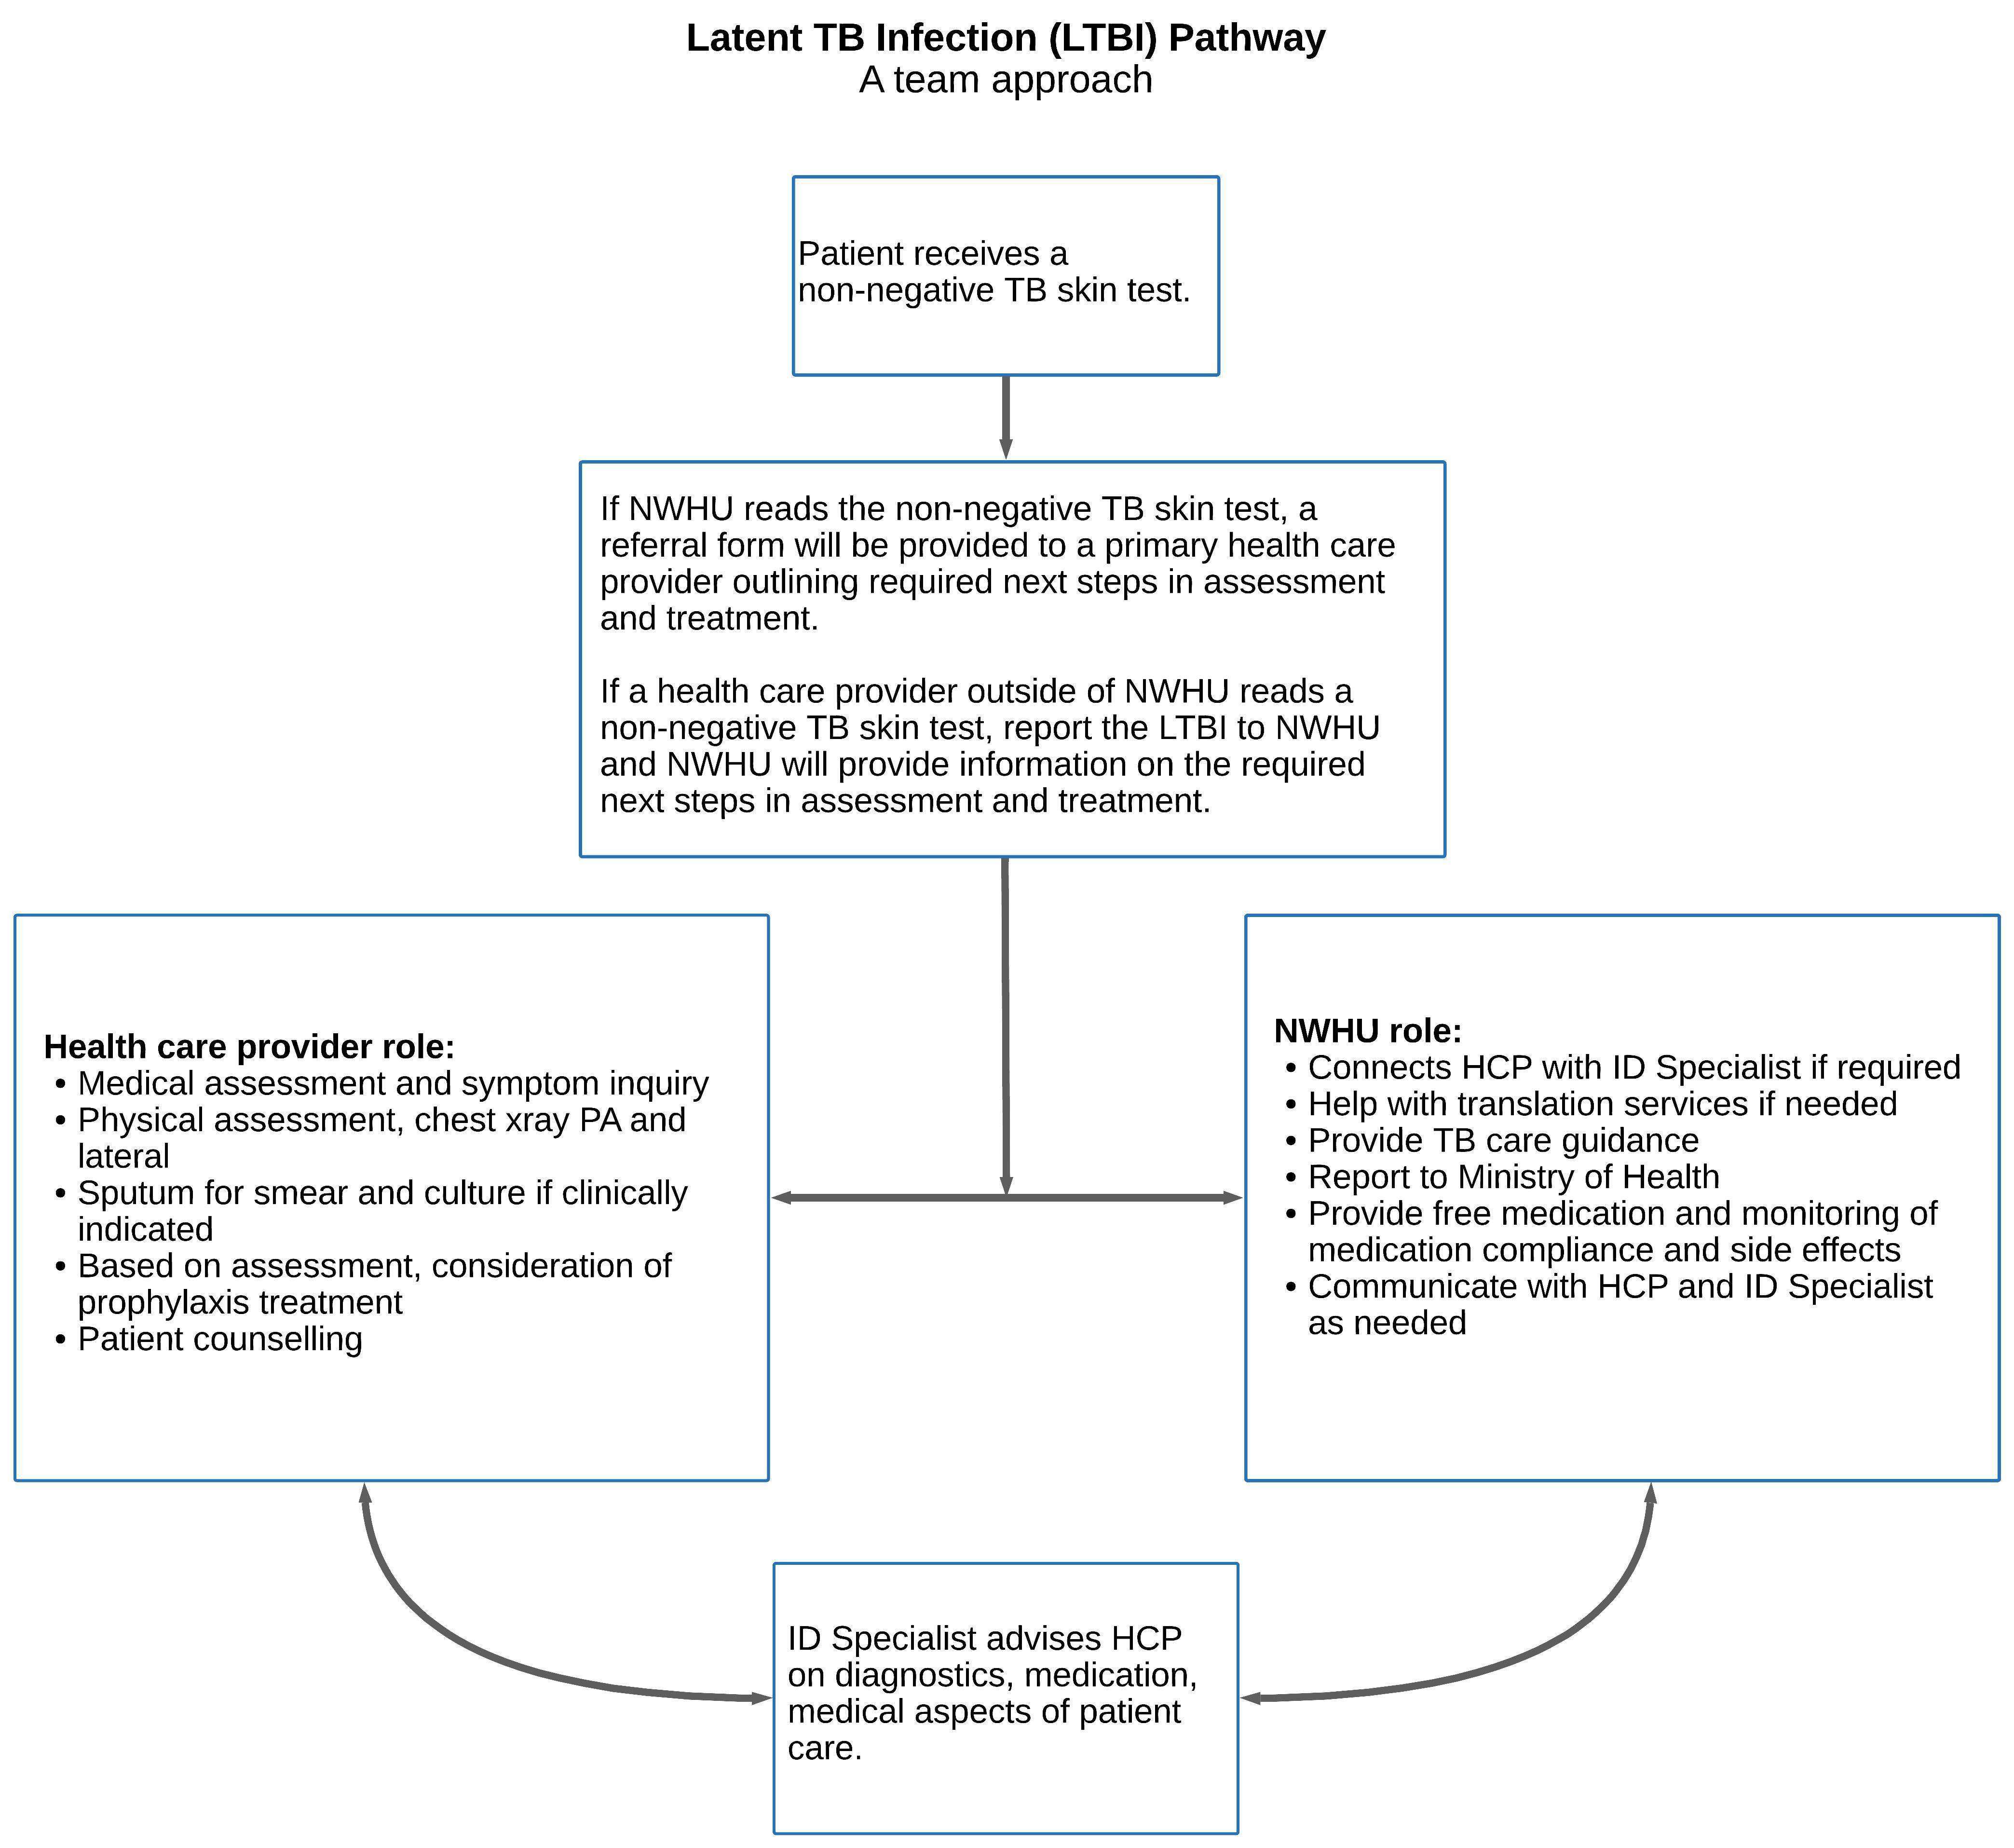 This image shows the latent TB case pathway. Specifically, if a health care provider identifies a suspect or confirmed TB case, they notify NWHU. The health care provider and NHWHU then complete specific steps.